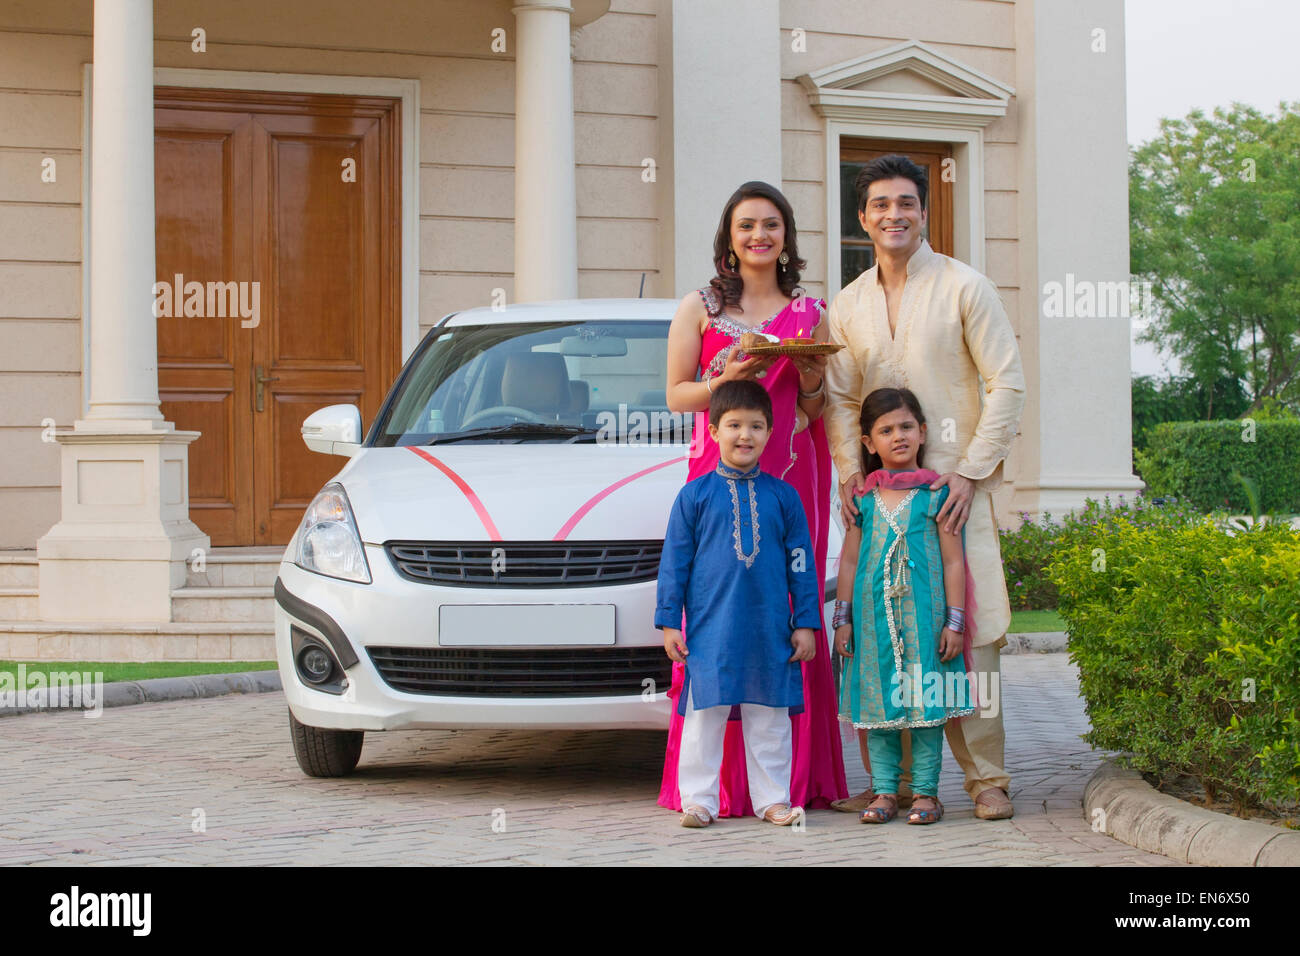 Family standing next to new car Stock Photo